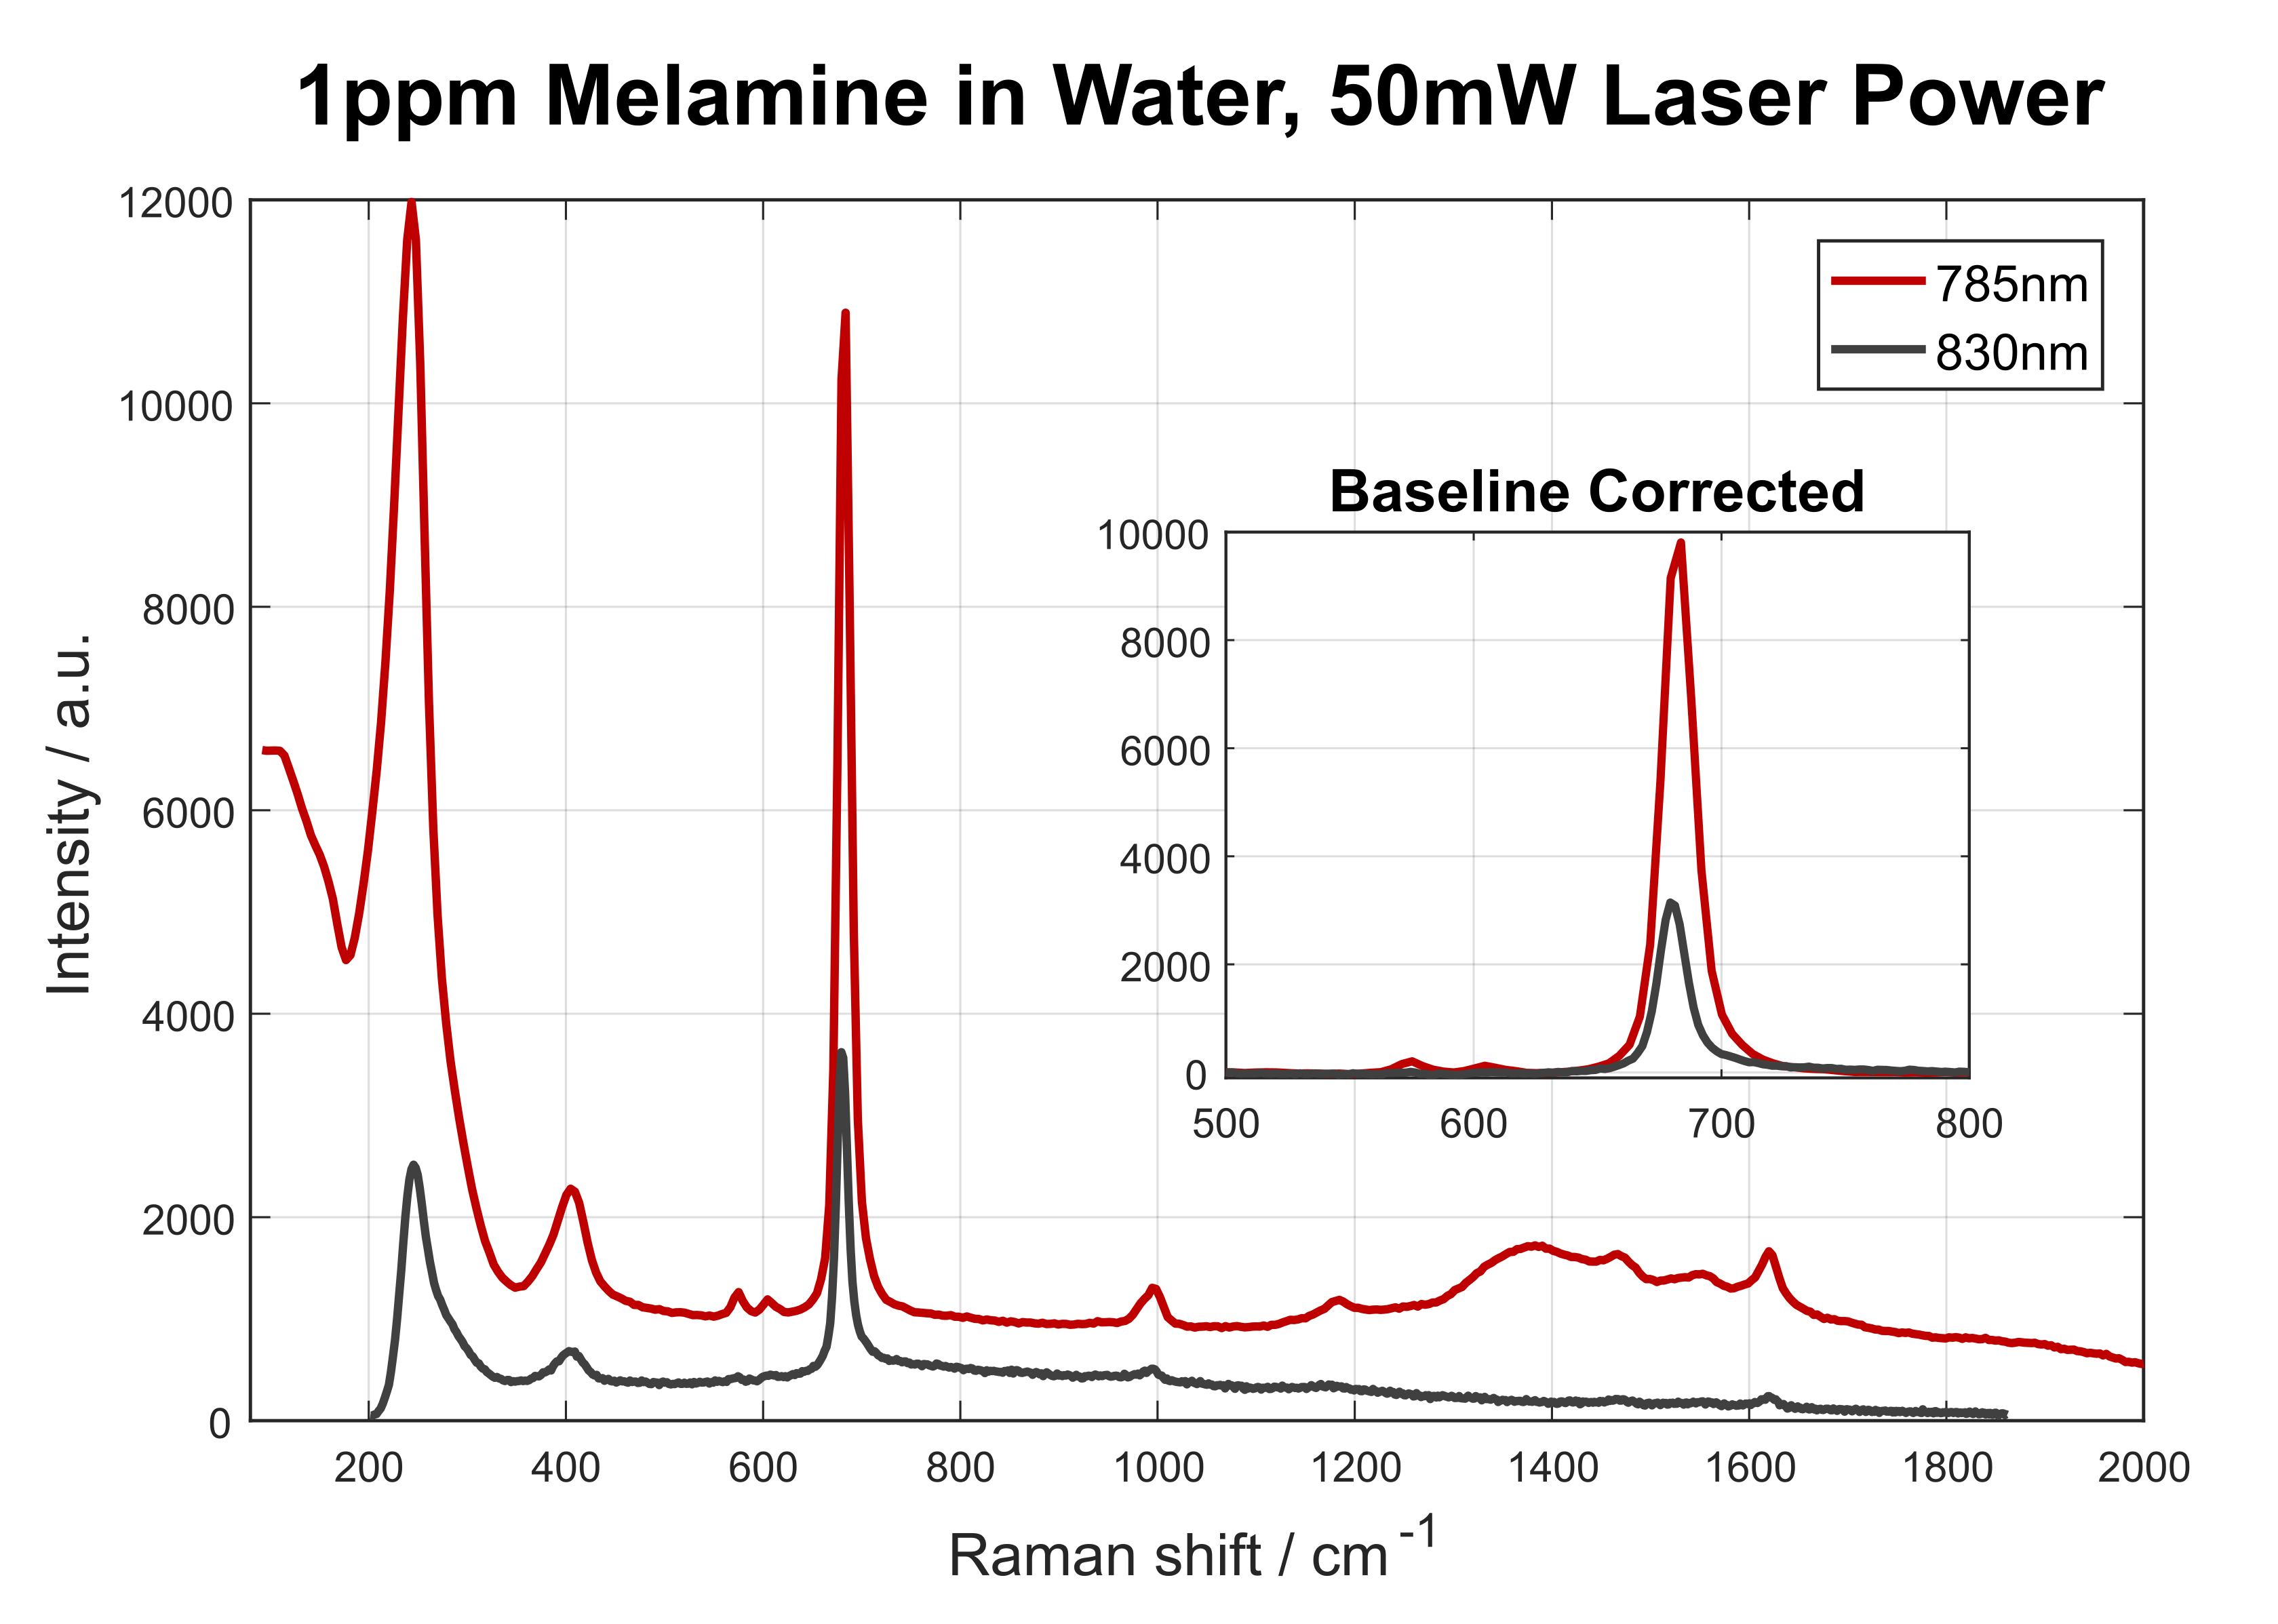 The graph shows the spectra of melamine and spectra of the characteristic peak of Melamine using 532 and 785 nm lasers. Measurements were conducted using S-Silver SERSitive substrates.